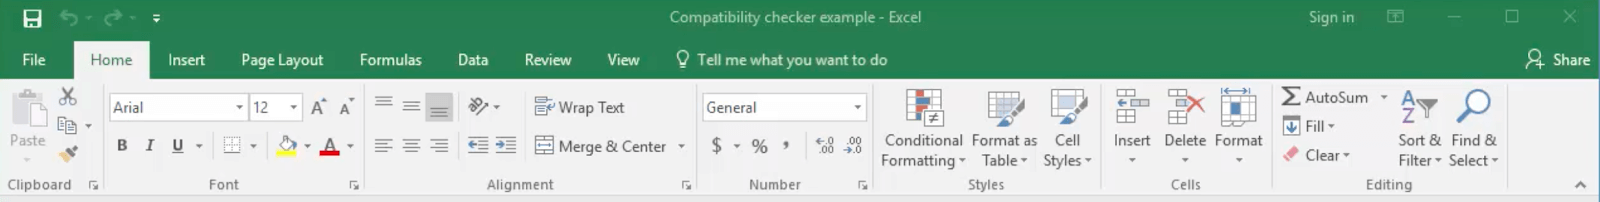 excel compatibility mode